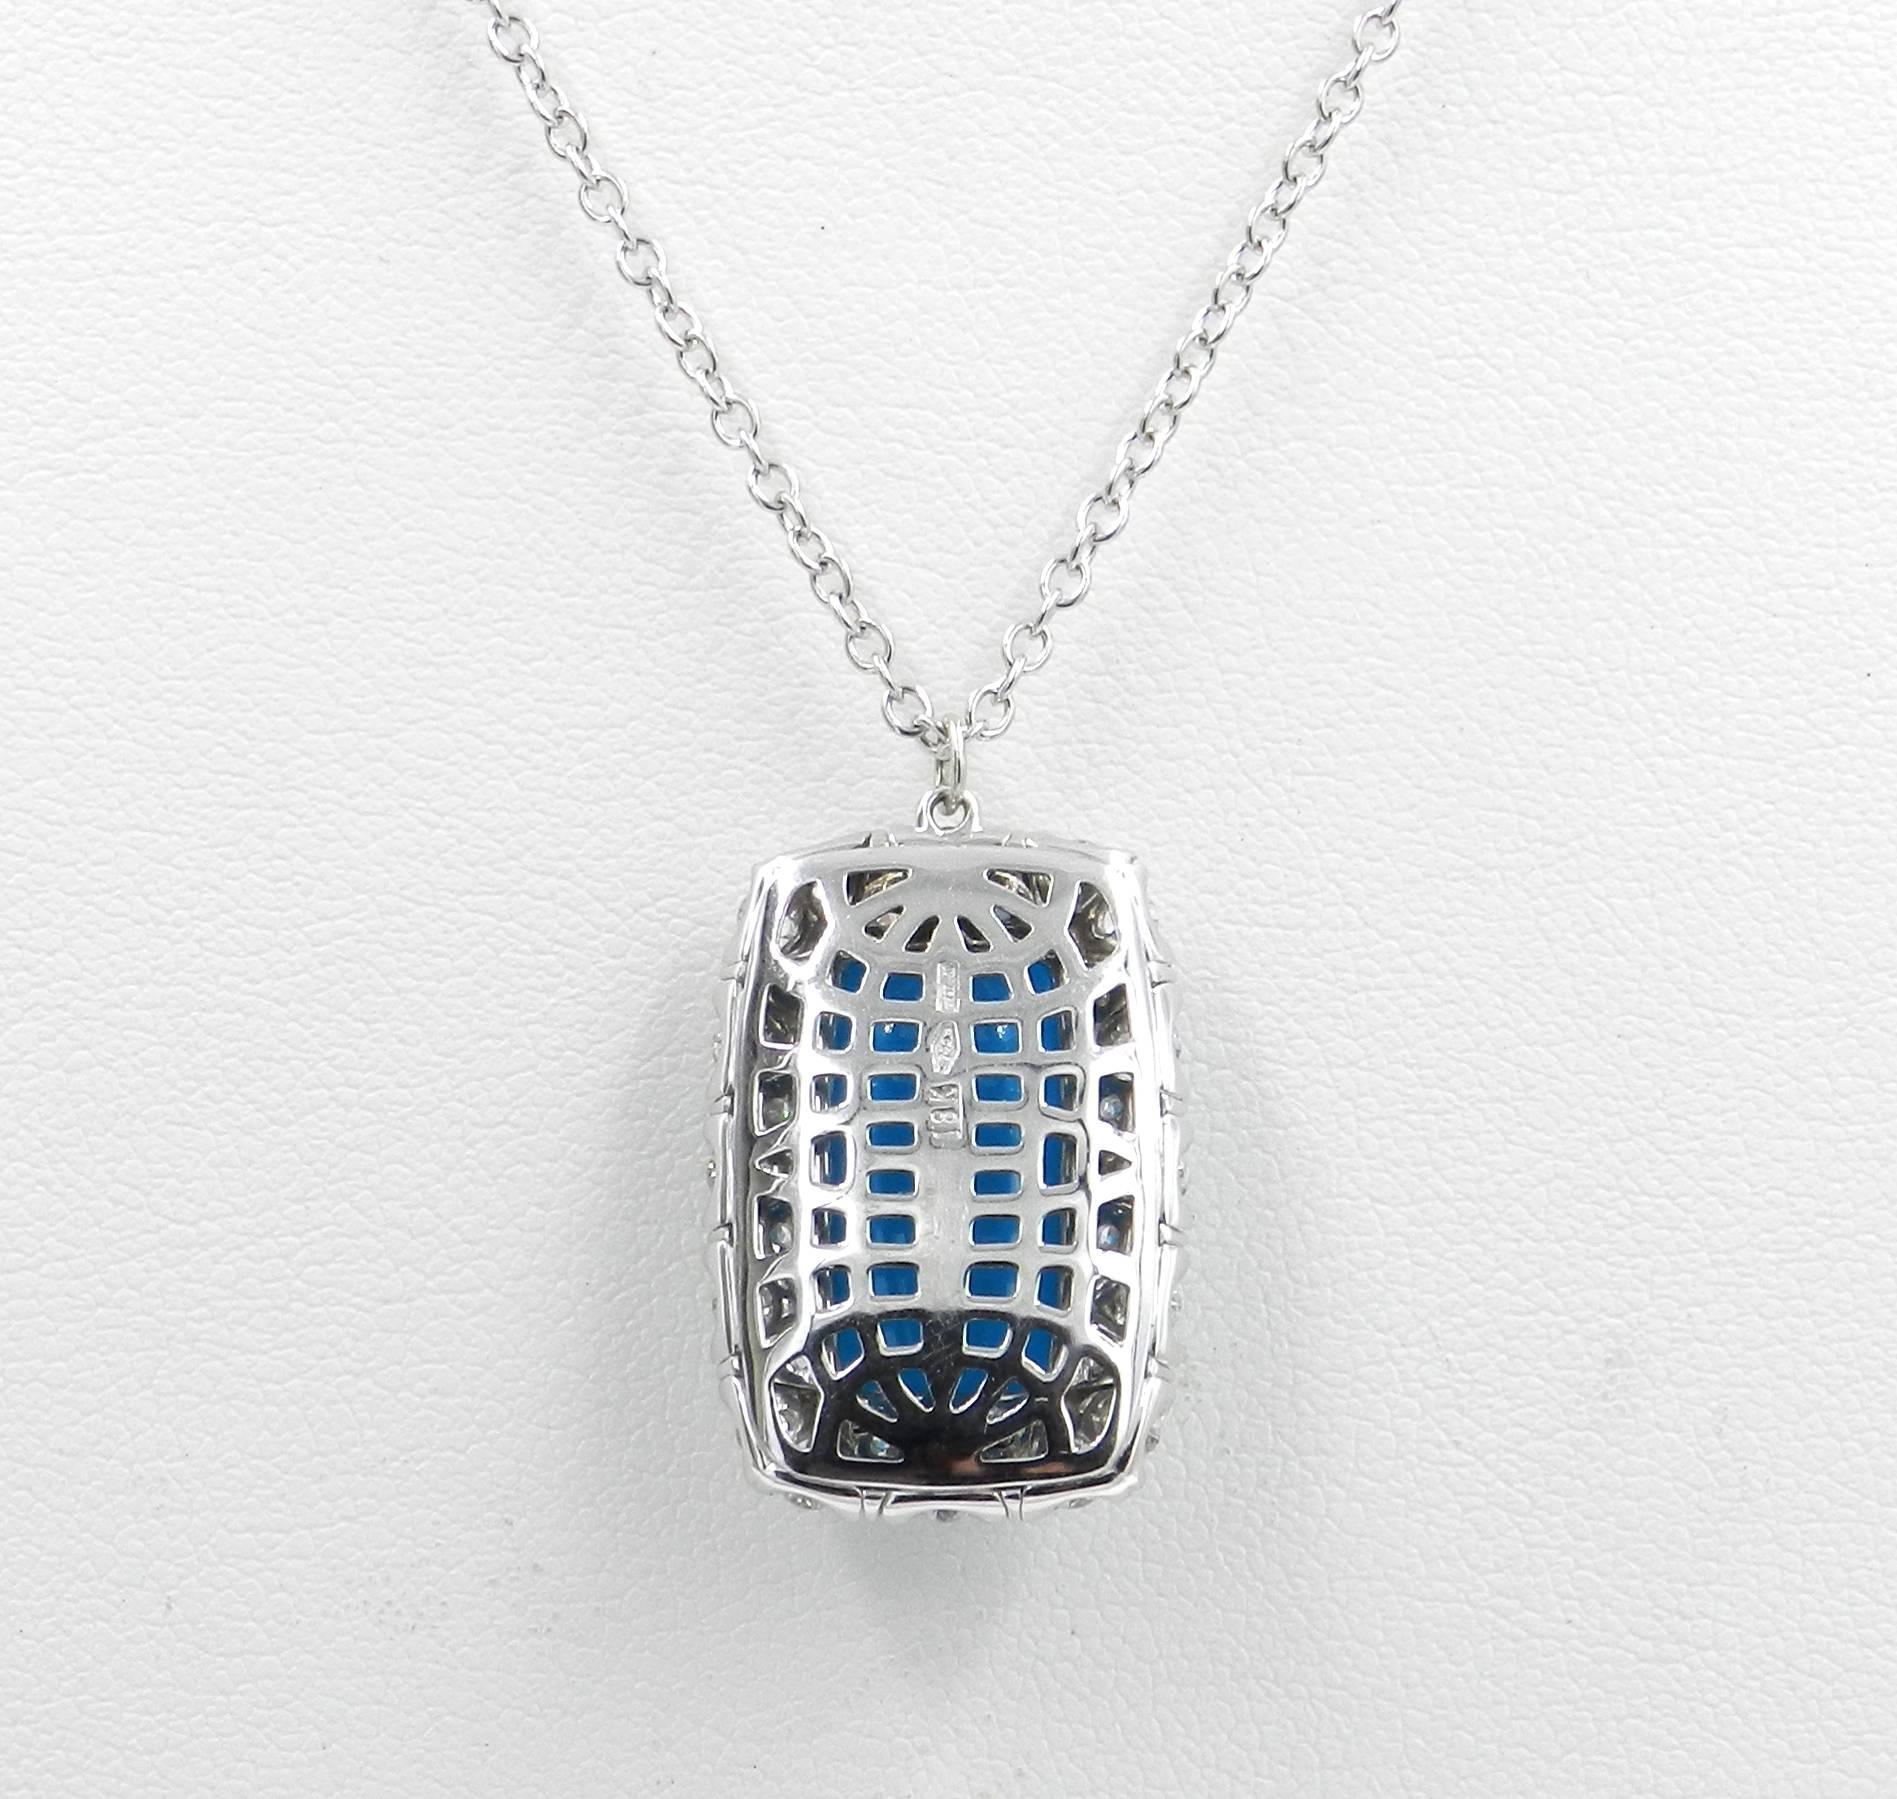 18KT White Gold GARAVELLI Pendant With Chain With DIAMONDS & TURQUOISE
The pendant measures MM.17x25
18 kt GOLD  :grs 8
DIAMONDS ct : 1,25
SEMIPRECIOUS Natural Turquoise ct : 8,40
